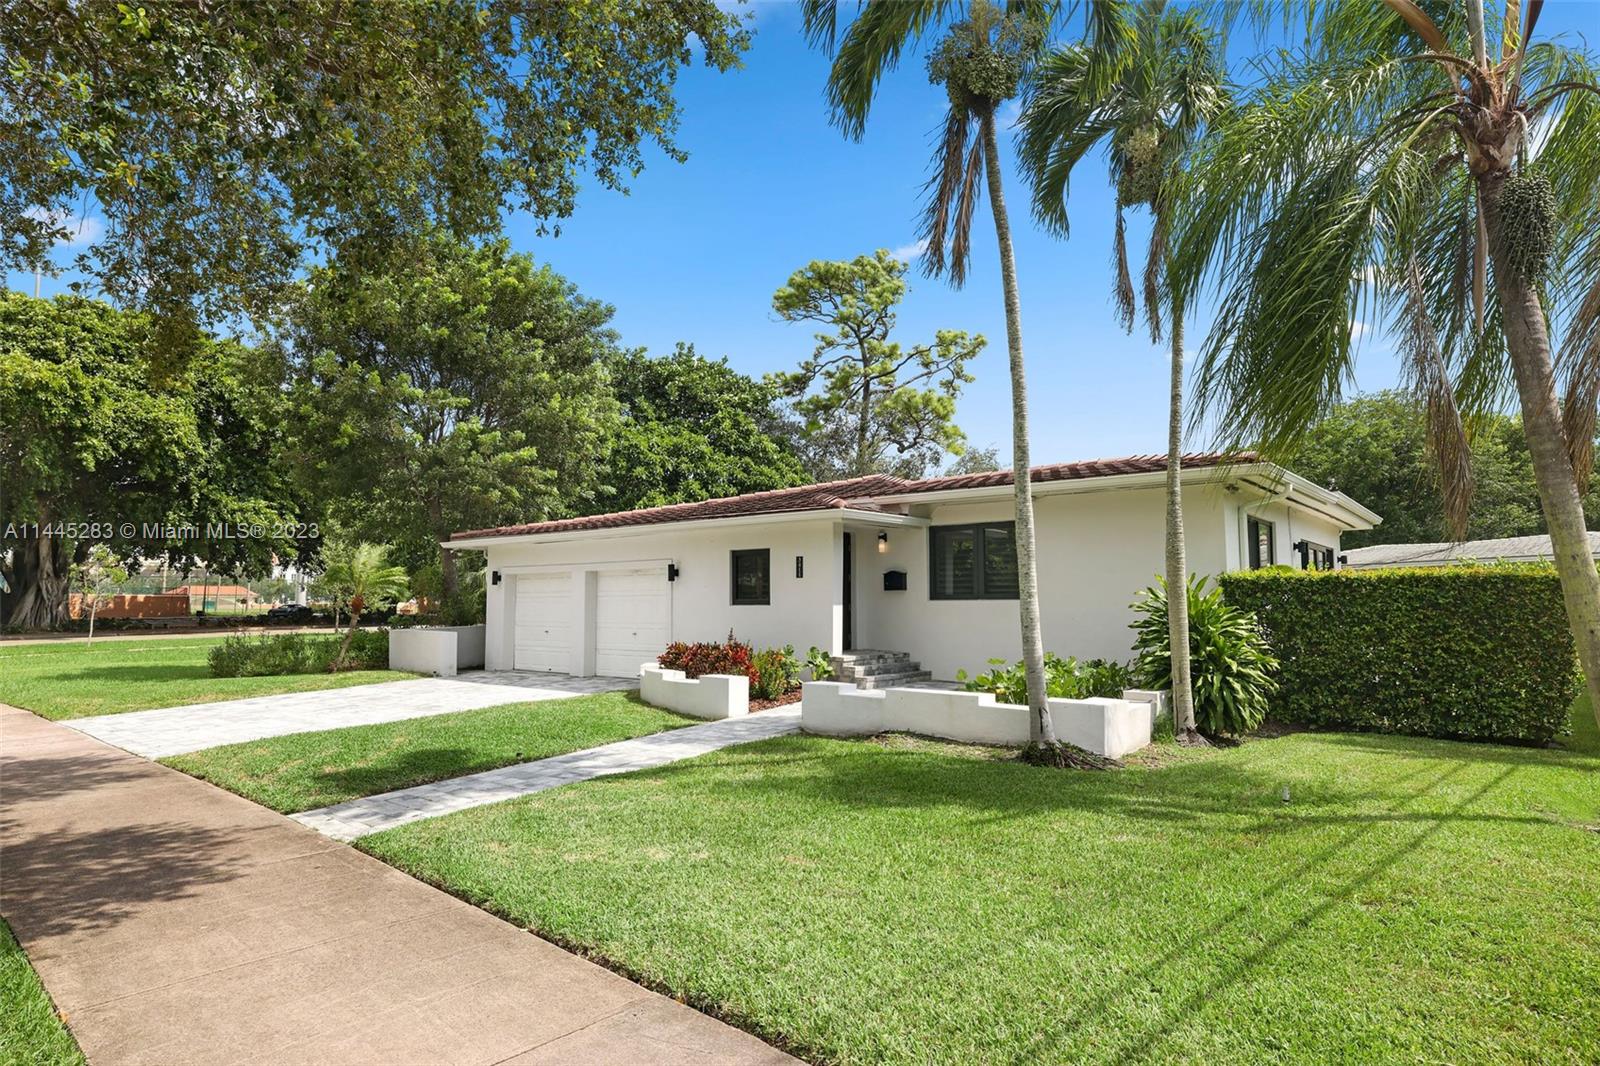 In the heart of Coral Gables, this spacious, beautifully maintained one-story home is ready for a
new owner. Curb appeal, with paver driveway and walkways, invite you indoors to a peaceful,
lovely oasis. Large social rooms allow for formal and informal entertaining. The soft glow of the
hardwood floors adorns the entire home, as well as plantation shutters and impact doors and
windows. Three bedrooms and two remodeled bathrooms, plus a tucked-away den that works as
a space for an office or playroom, make this floorplan ideal. The backyard is uber private and a
sizable blank canvas for playing, entertaining, enjoying the outdoors, and even a future pool.
Two car garage. Located near the Coral Gables Youth Center, Library and Miracle Mile. MIA is
5 miles away. A Very Special Home.